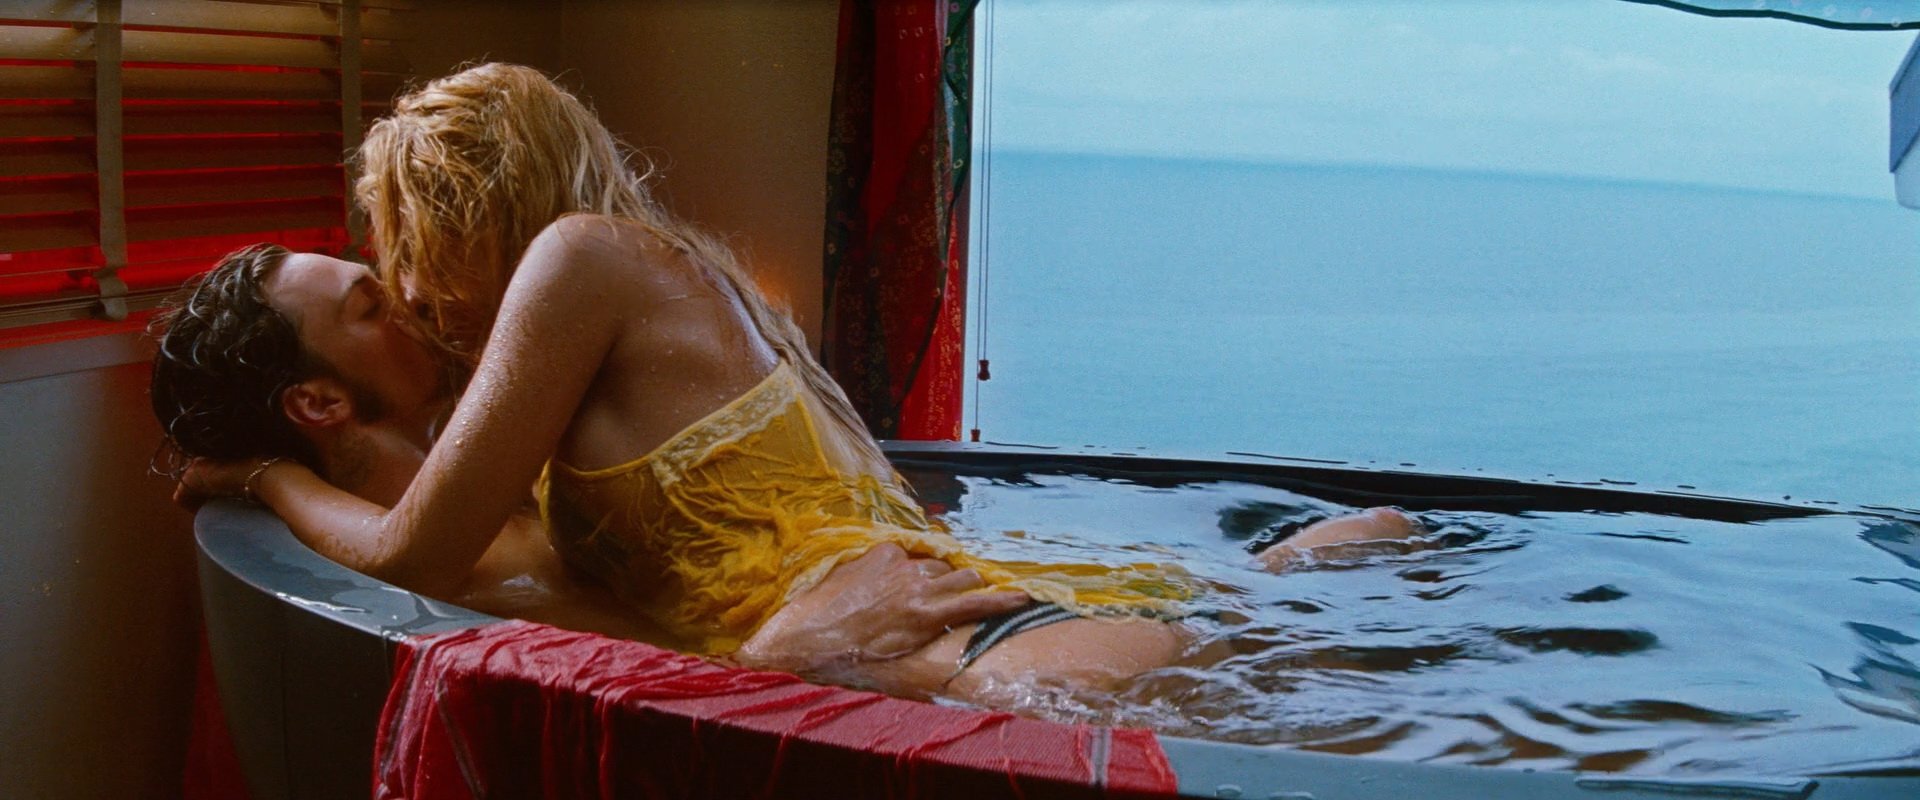 Blake Lively Sexy - Savages (2012) HD 1080p (6 Pics + Gifs & Videos)